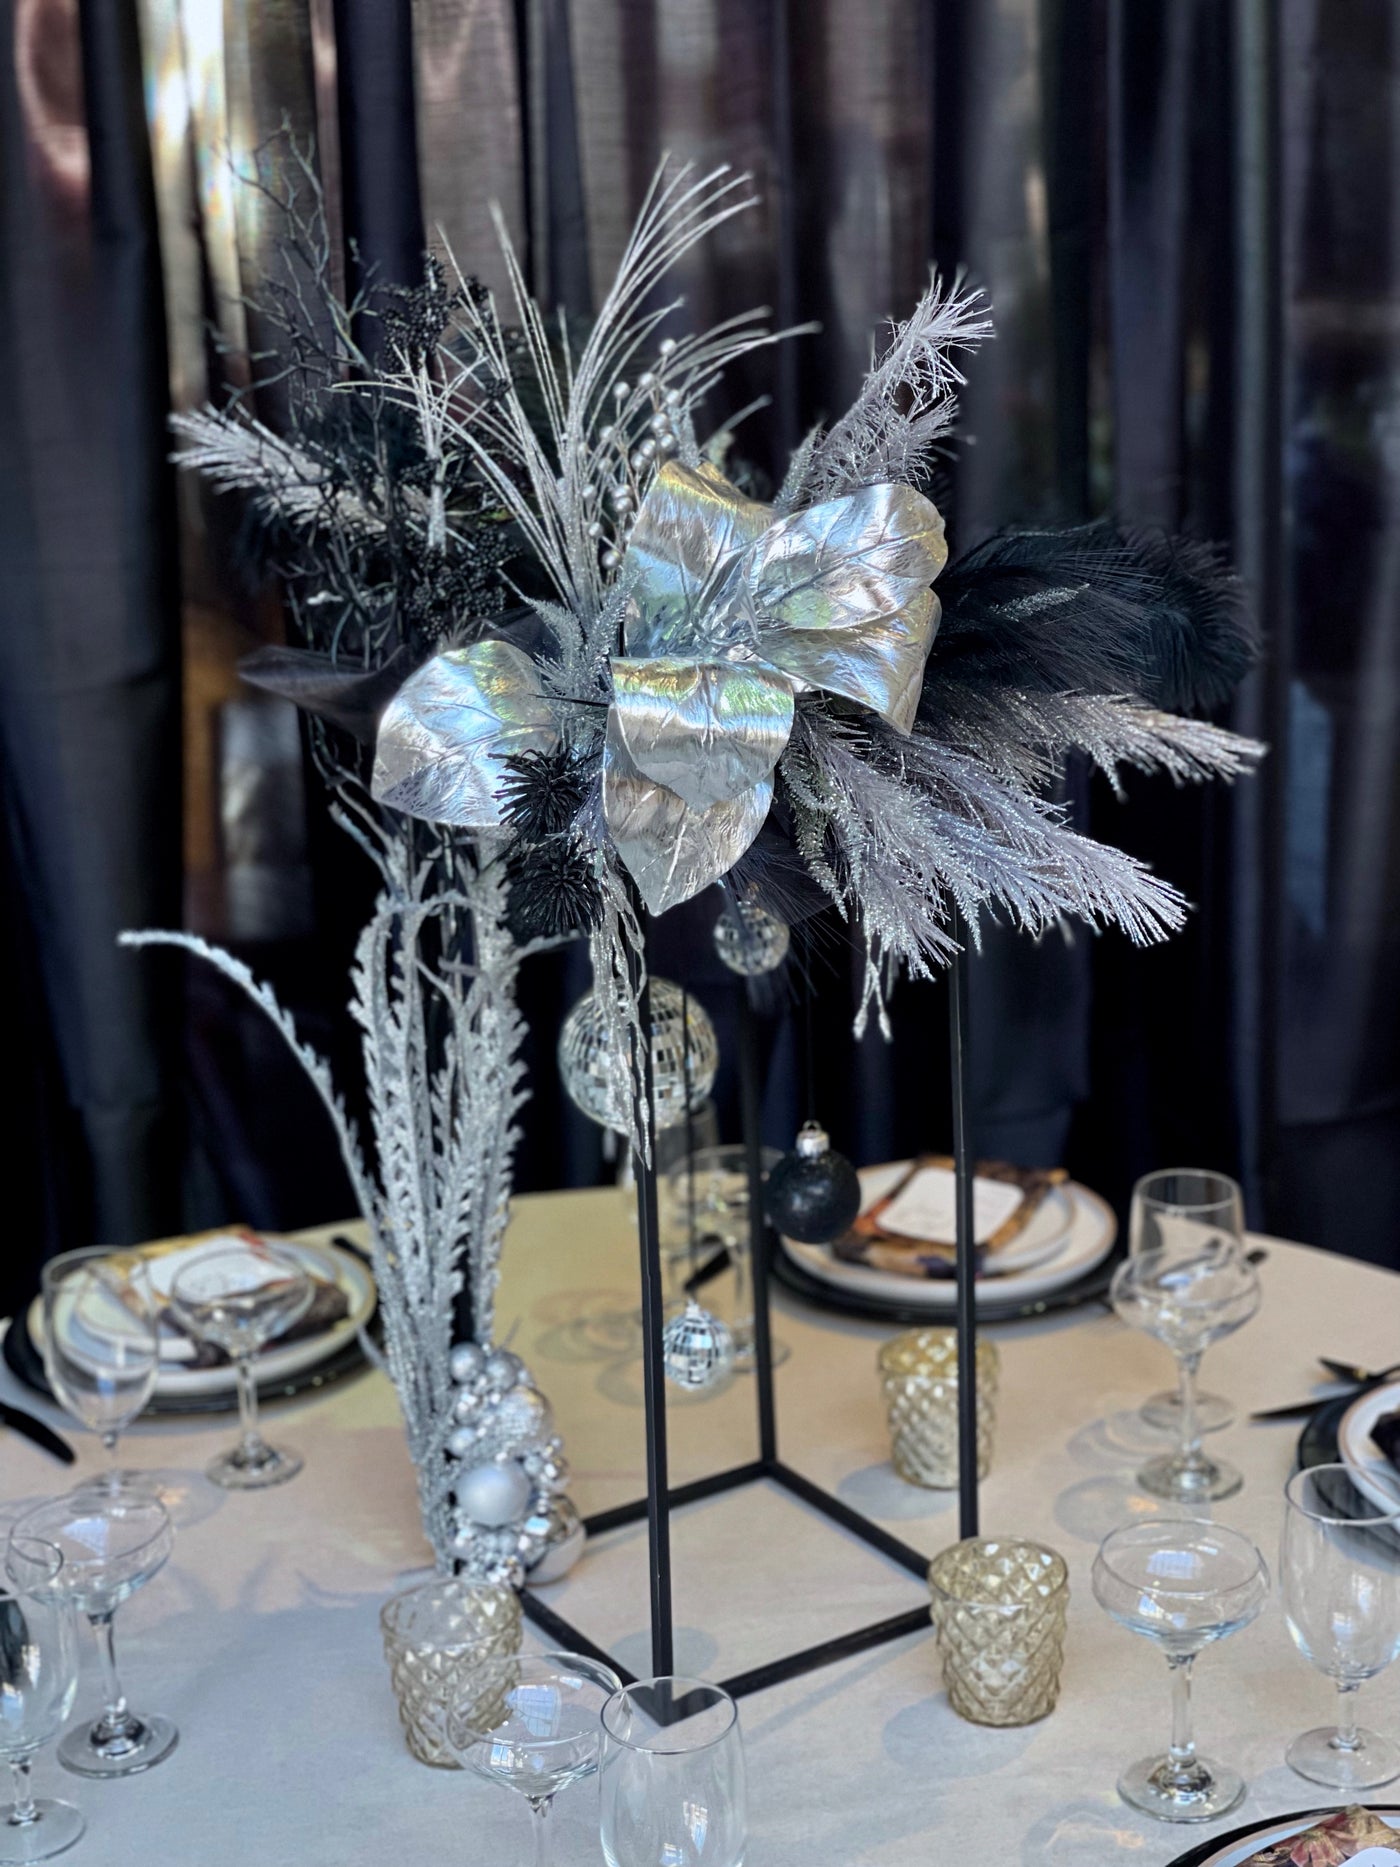 Rent a Rose- Black and silver tall rectangular centrepiece with feathers. Rent for $99.00